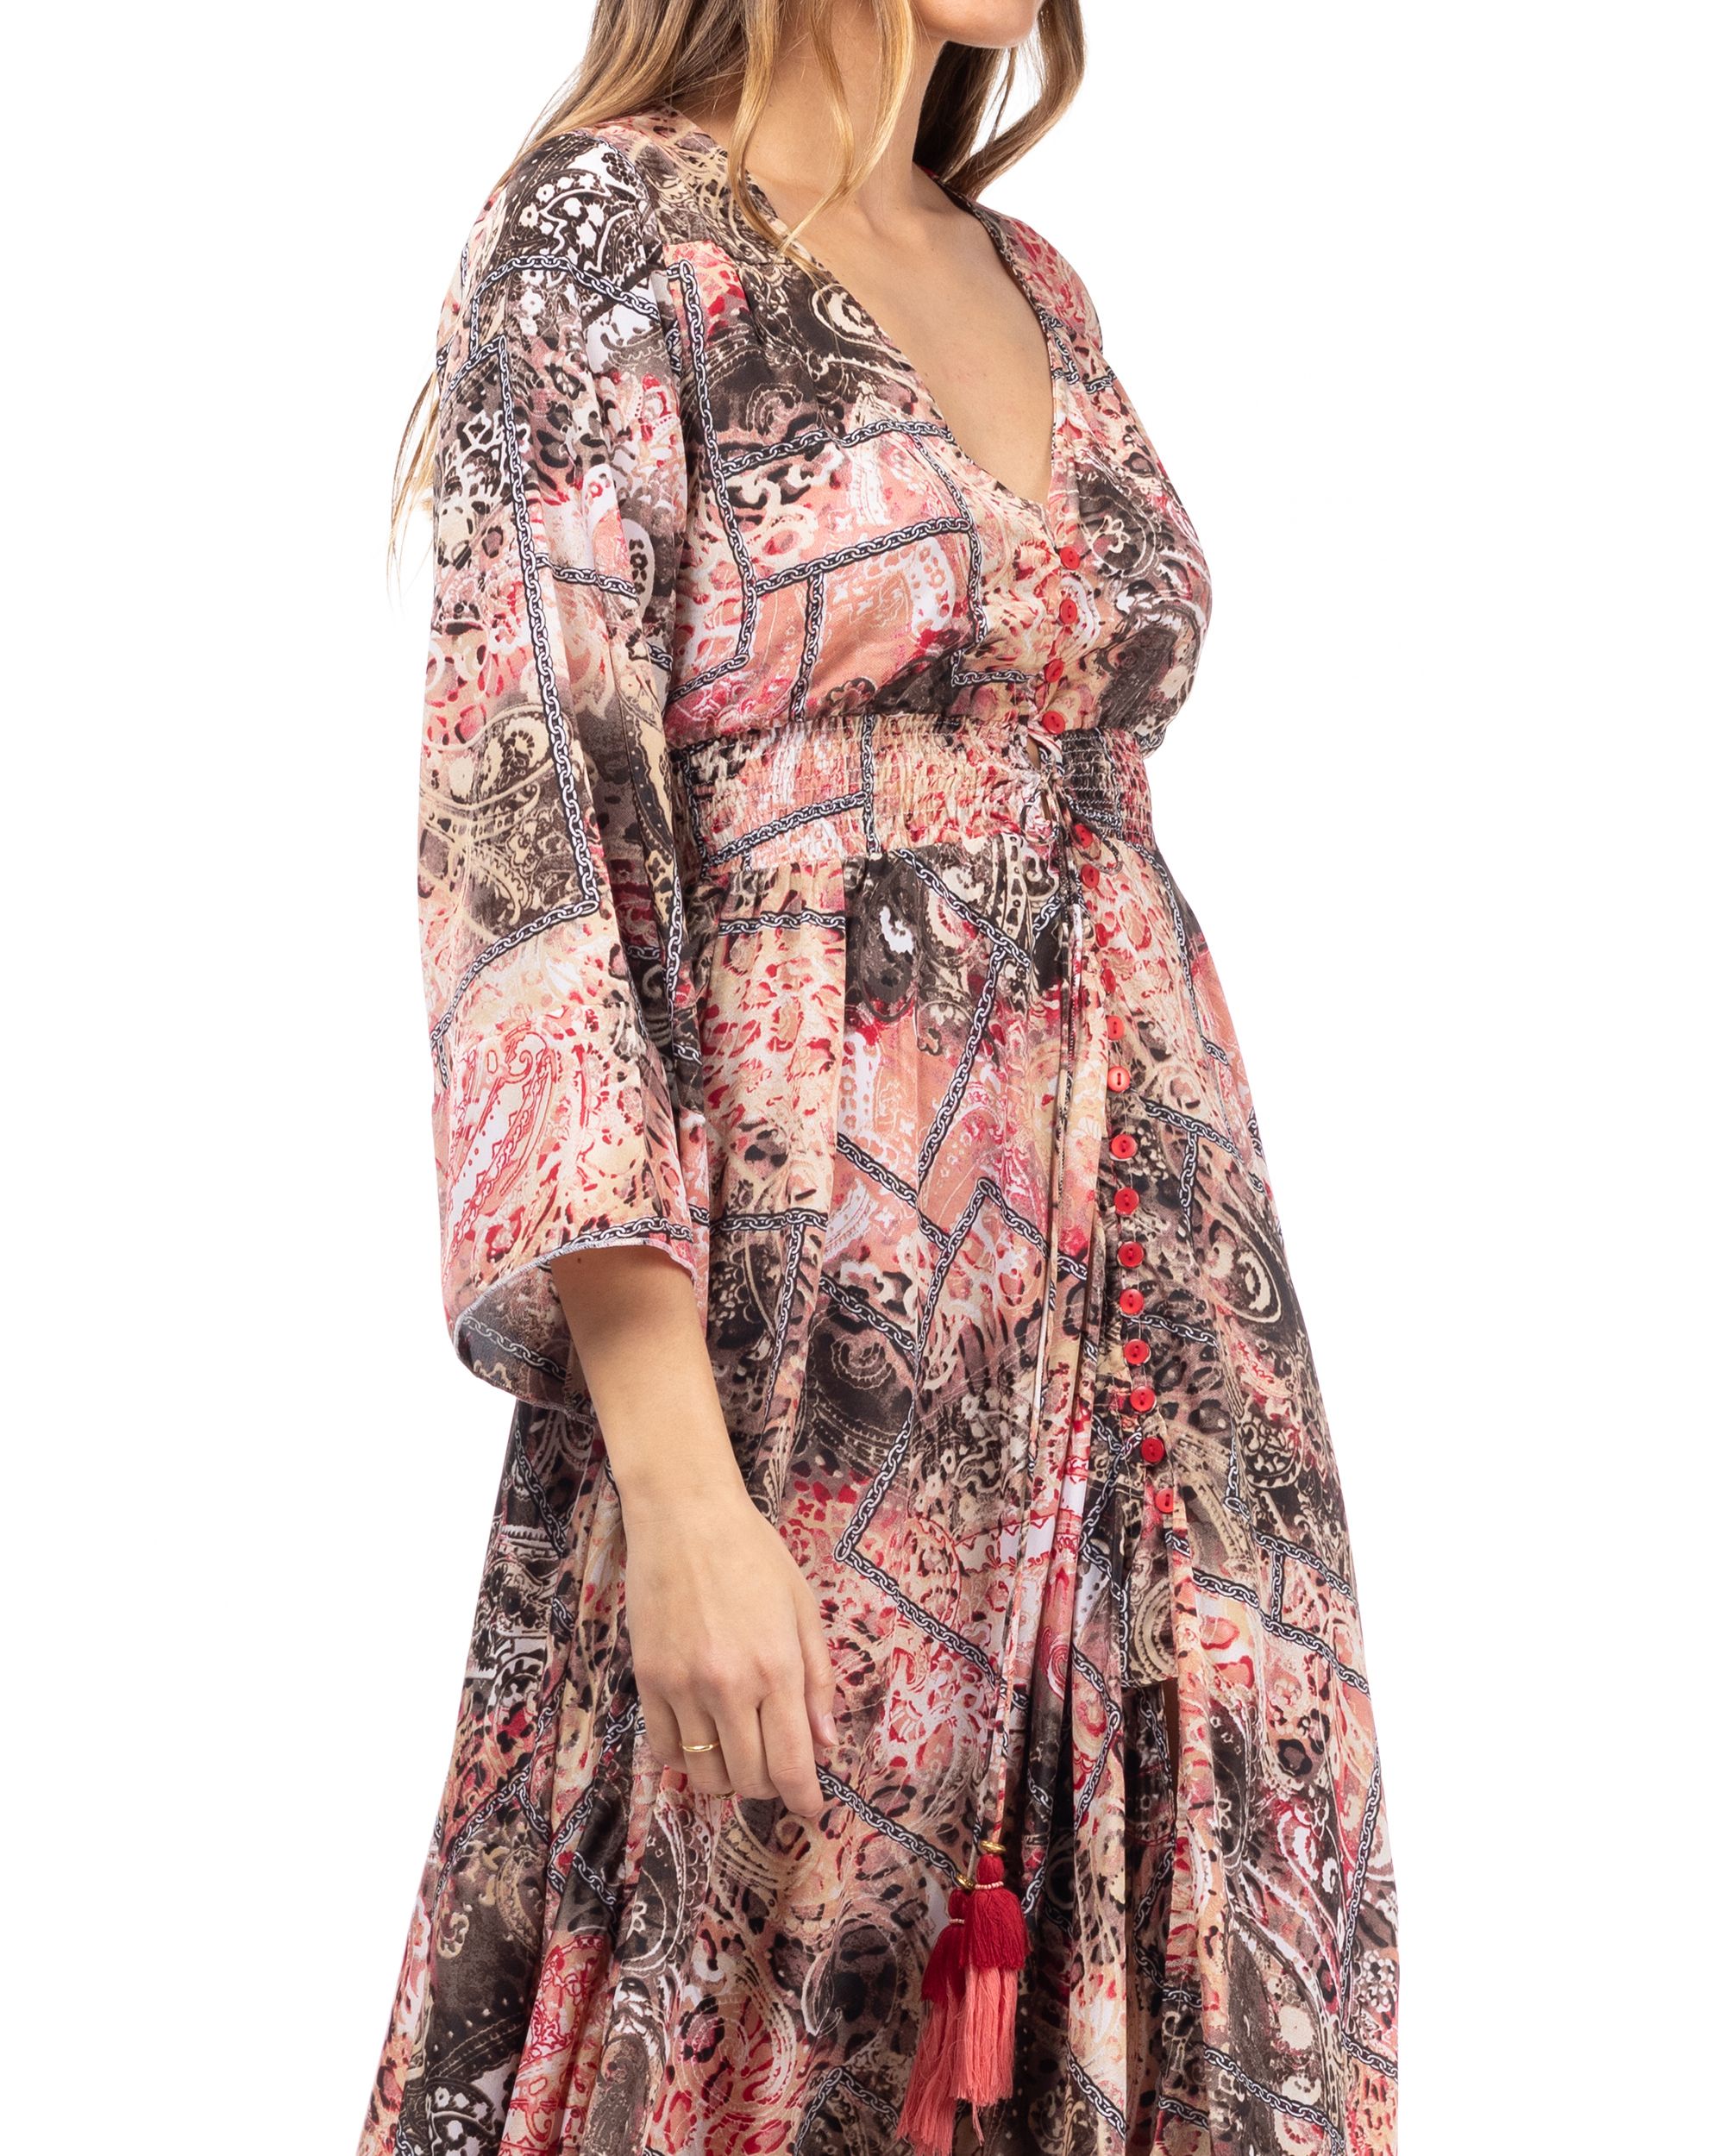 Long printed dress with flared French sleeves, buttons and elastic waist